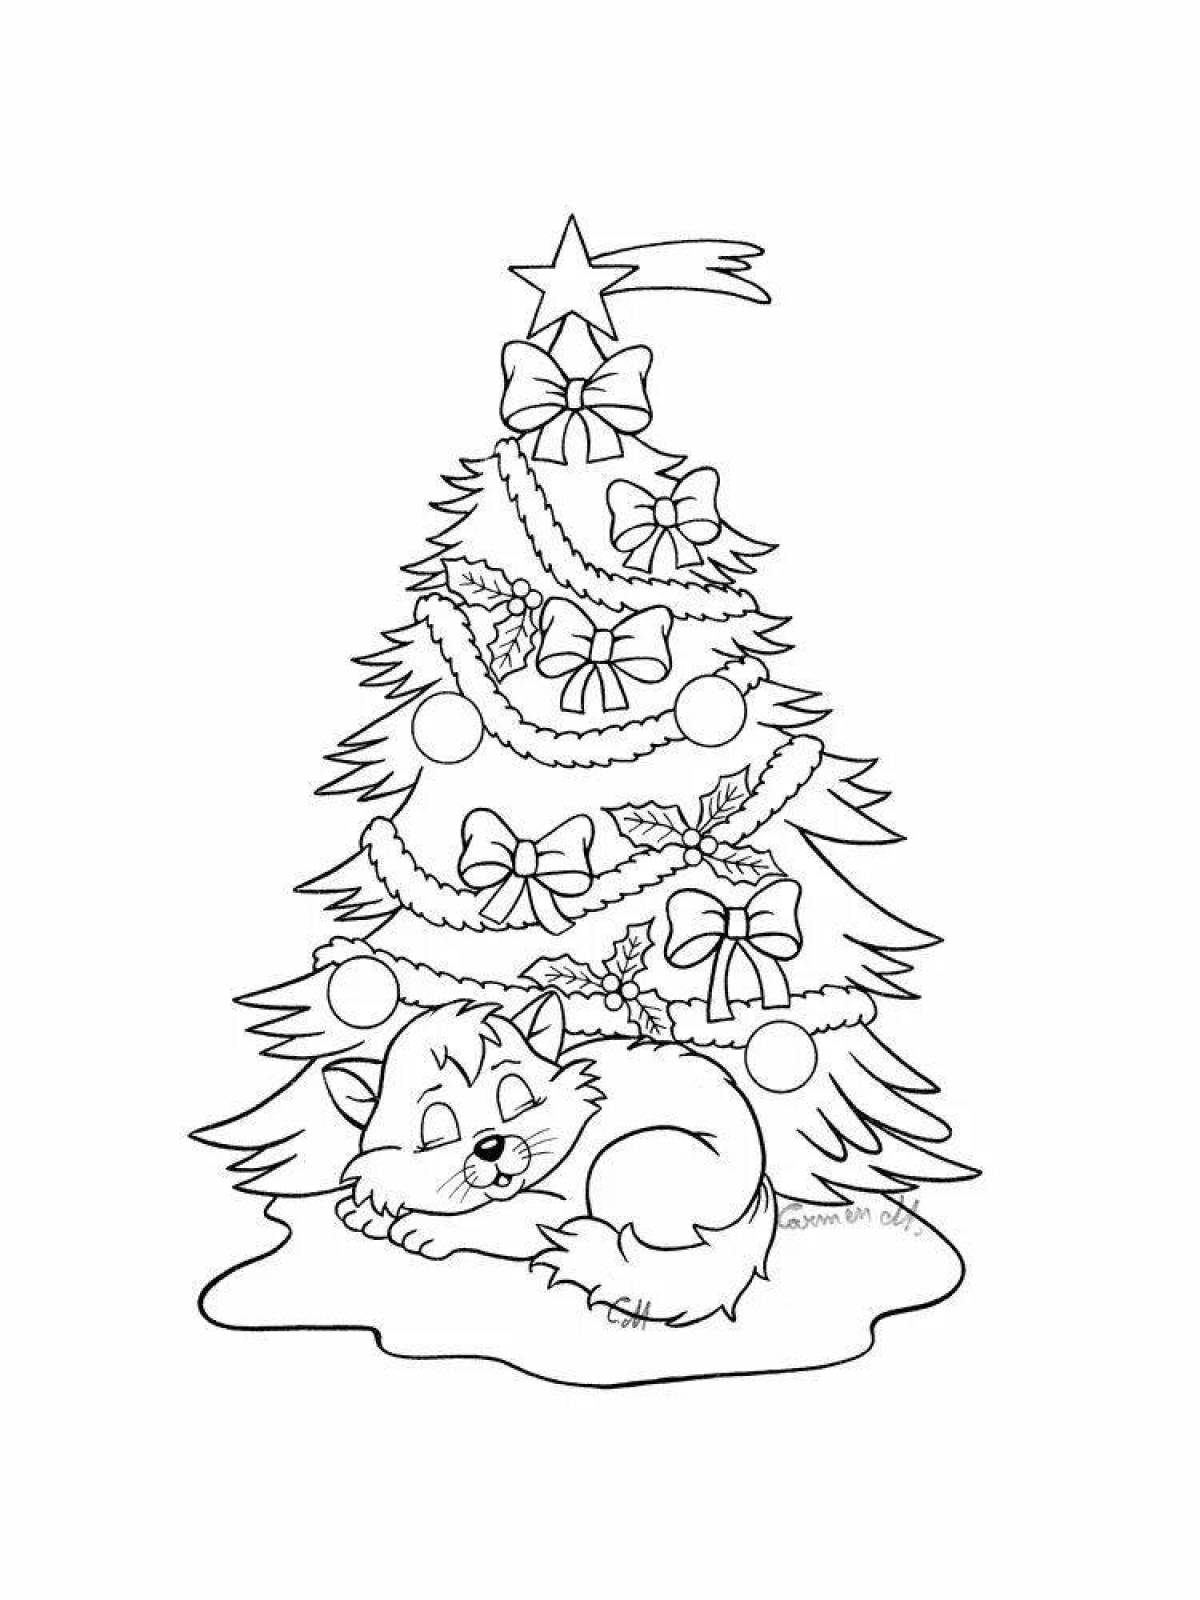 Amazing Christmas tree and rabbit coloring book